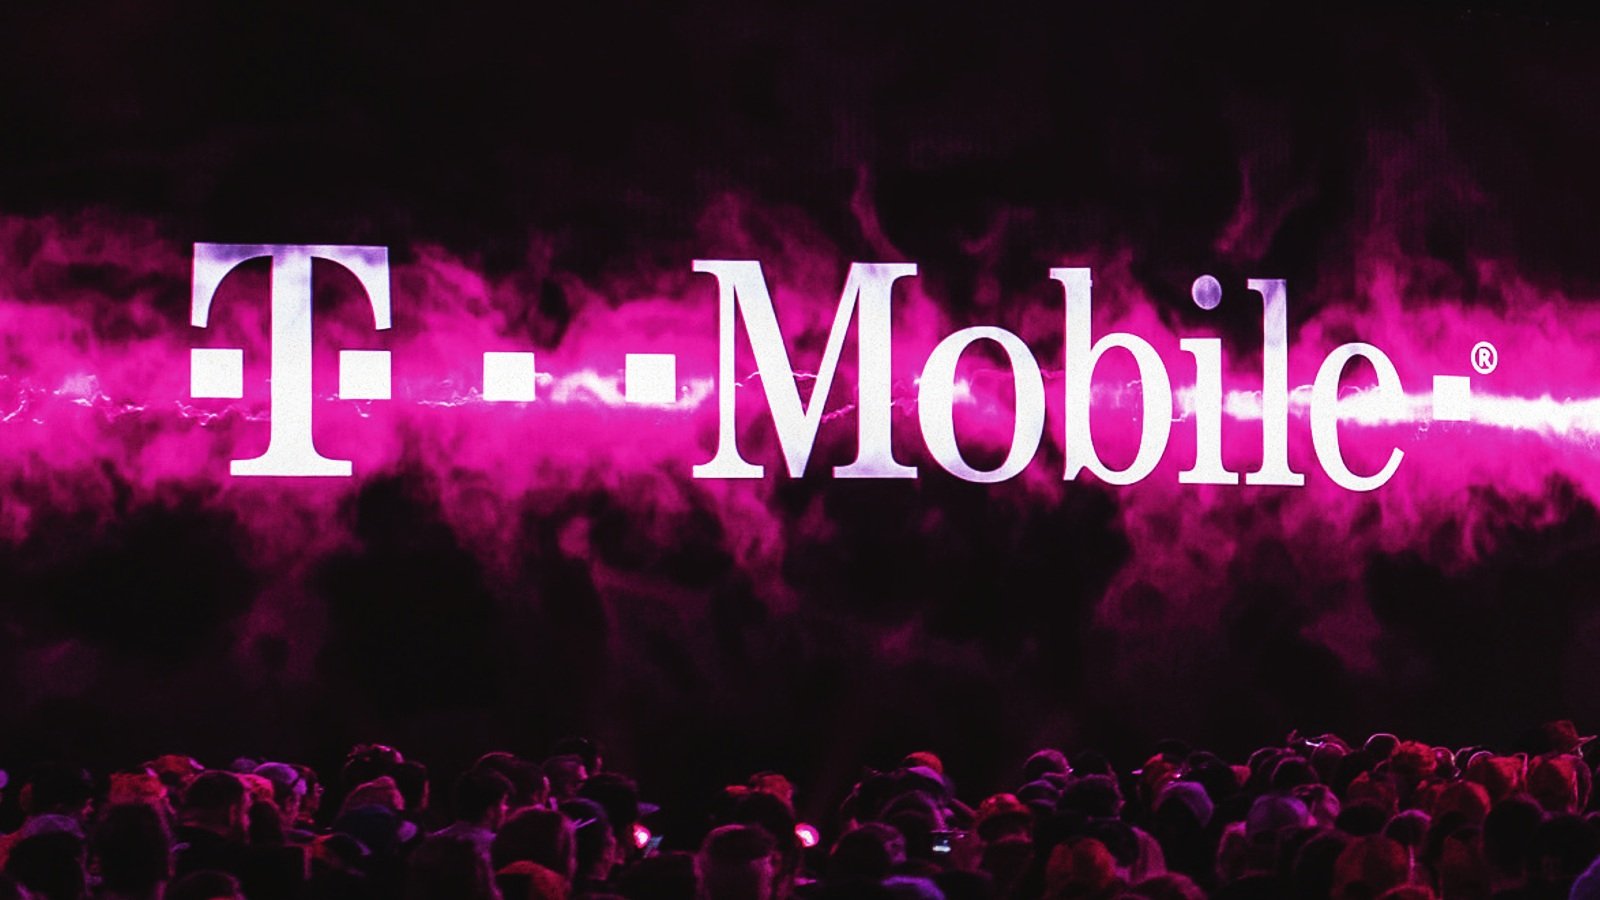 T-Mobile denies new data breach rumors, points to authorized retailer – Source: www.bleepingcomputer.com